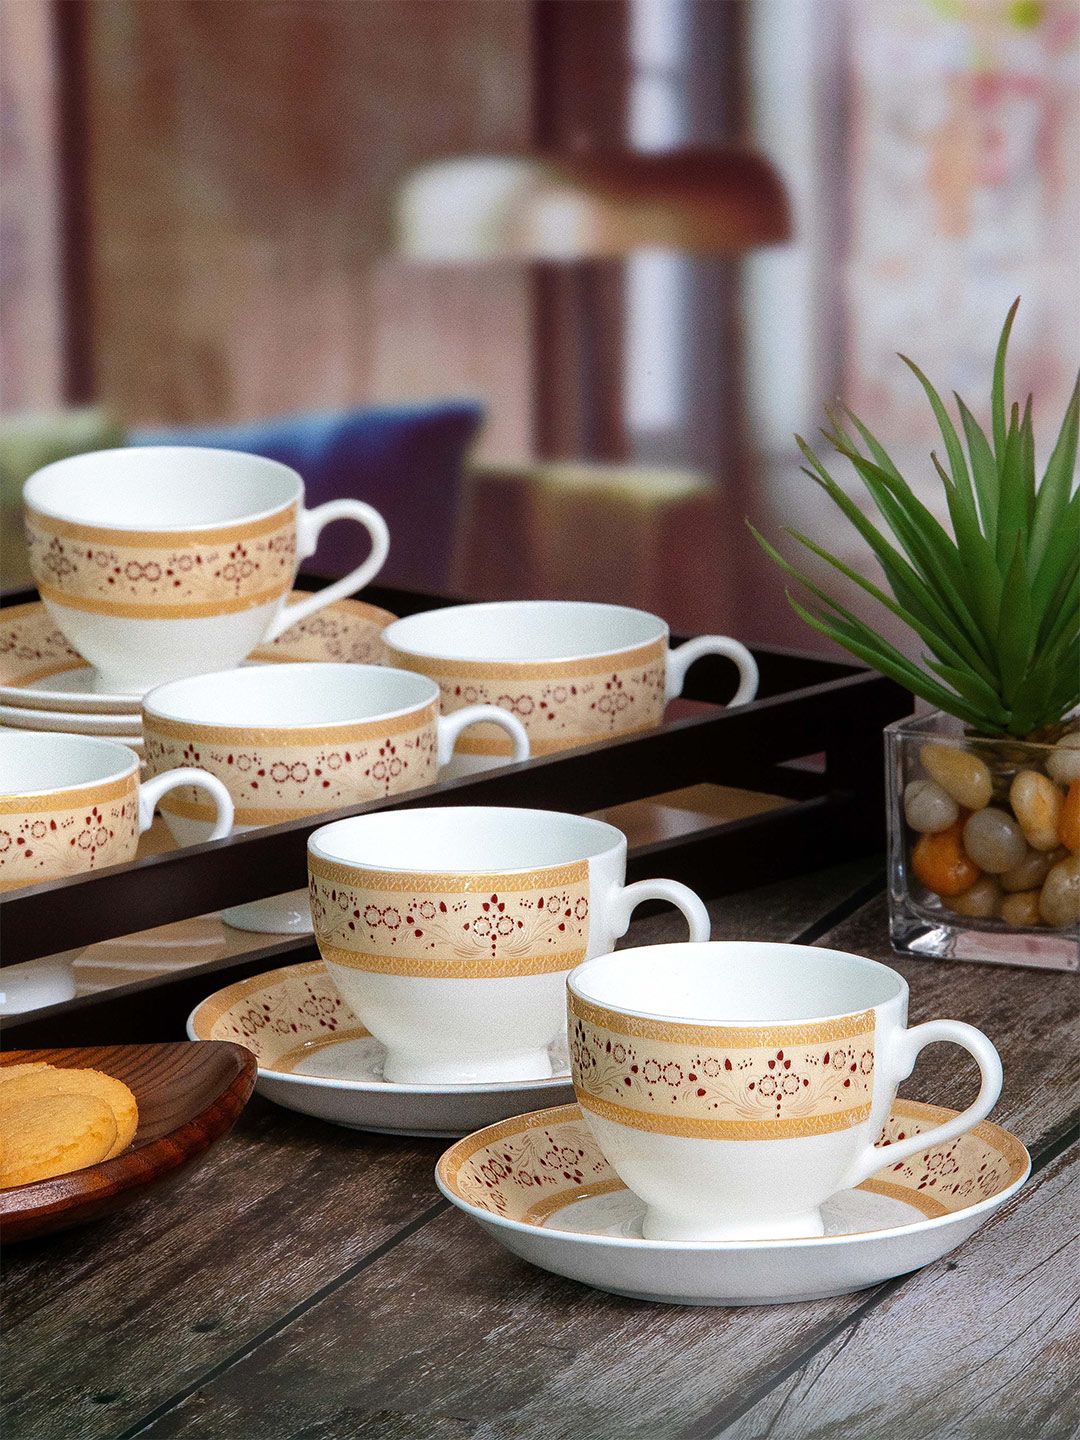 SONAKI White & Yellow Printed Bone China Glossy Cups and Saucers Set of 12 Cups and Mugs Price in India